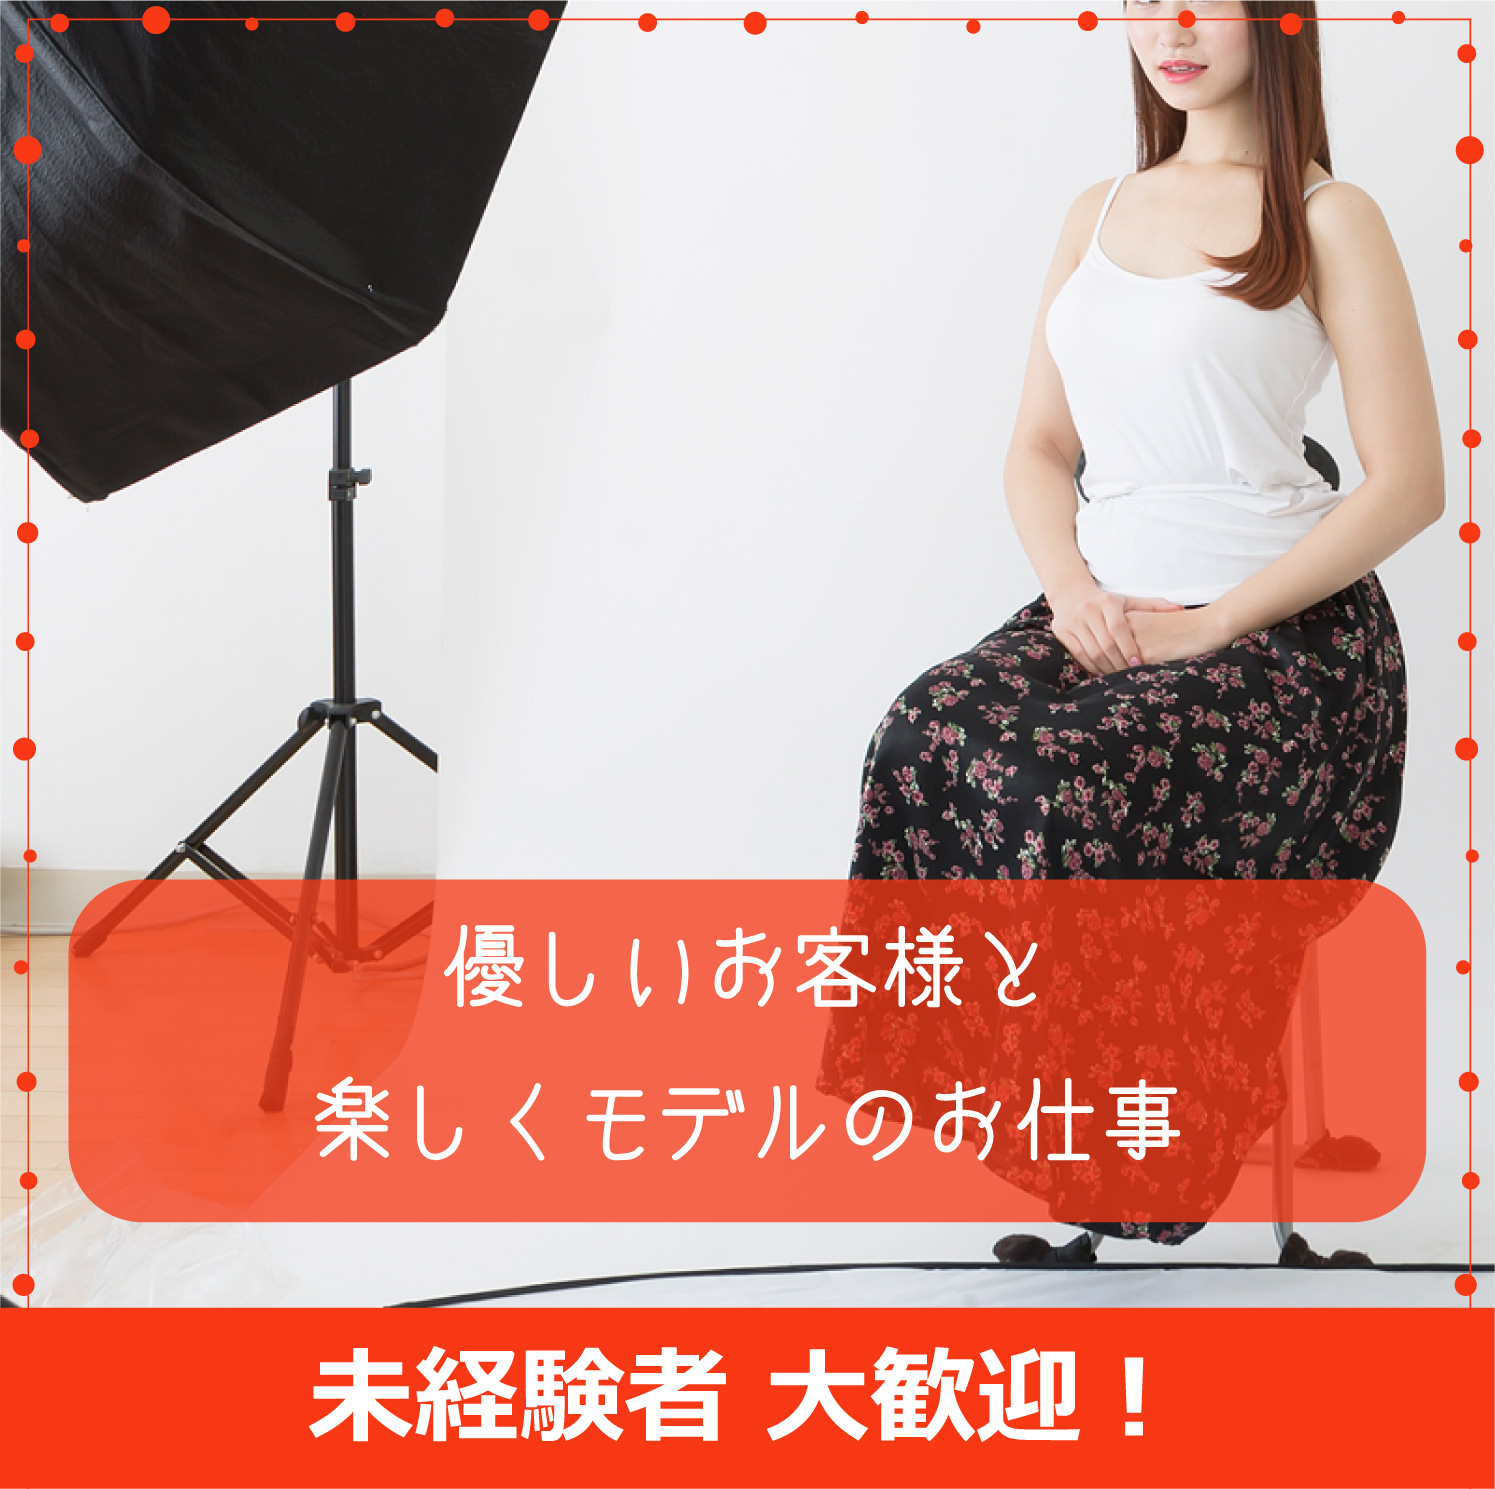 Girls Photo Stageの求人情報画像7